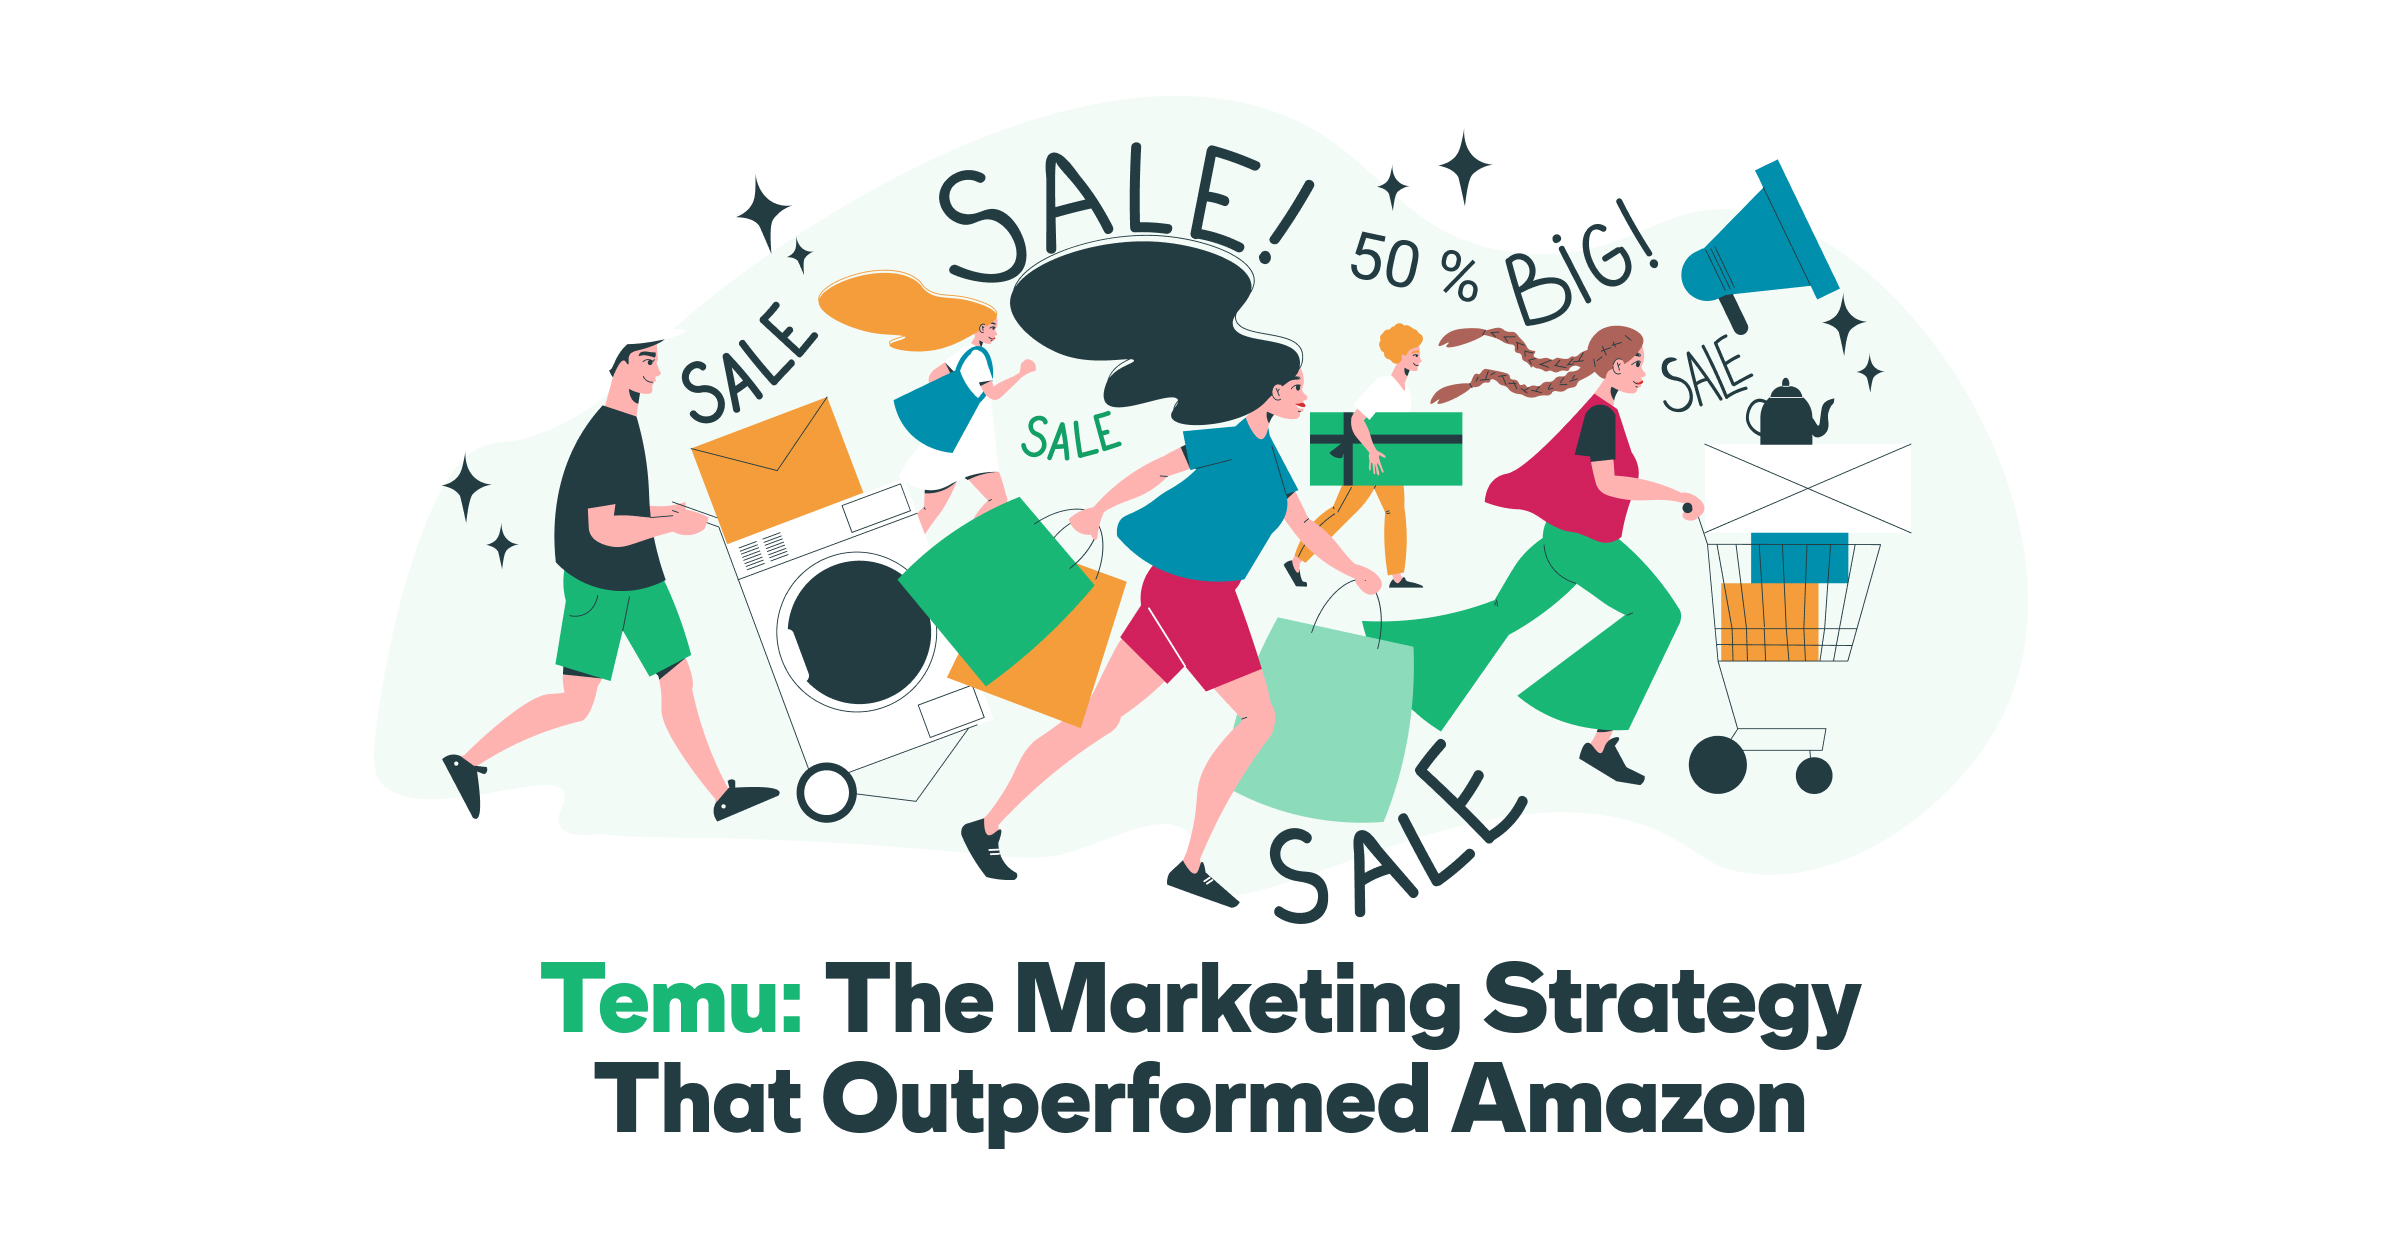 Temu: The Marketing Strategy That Outperformed